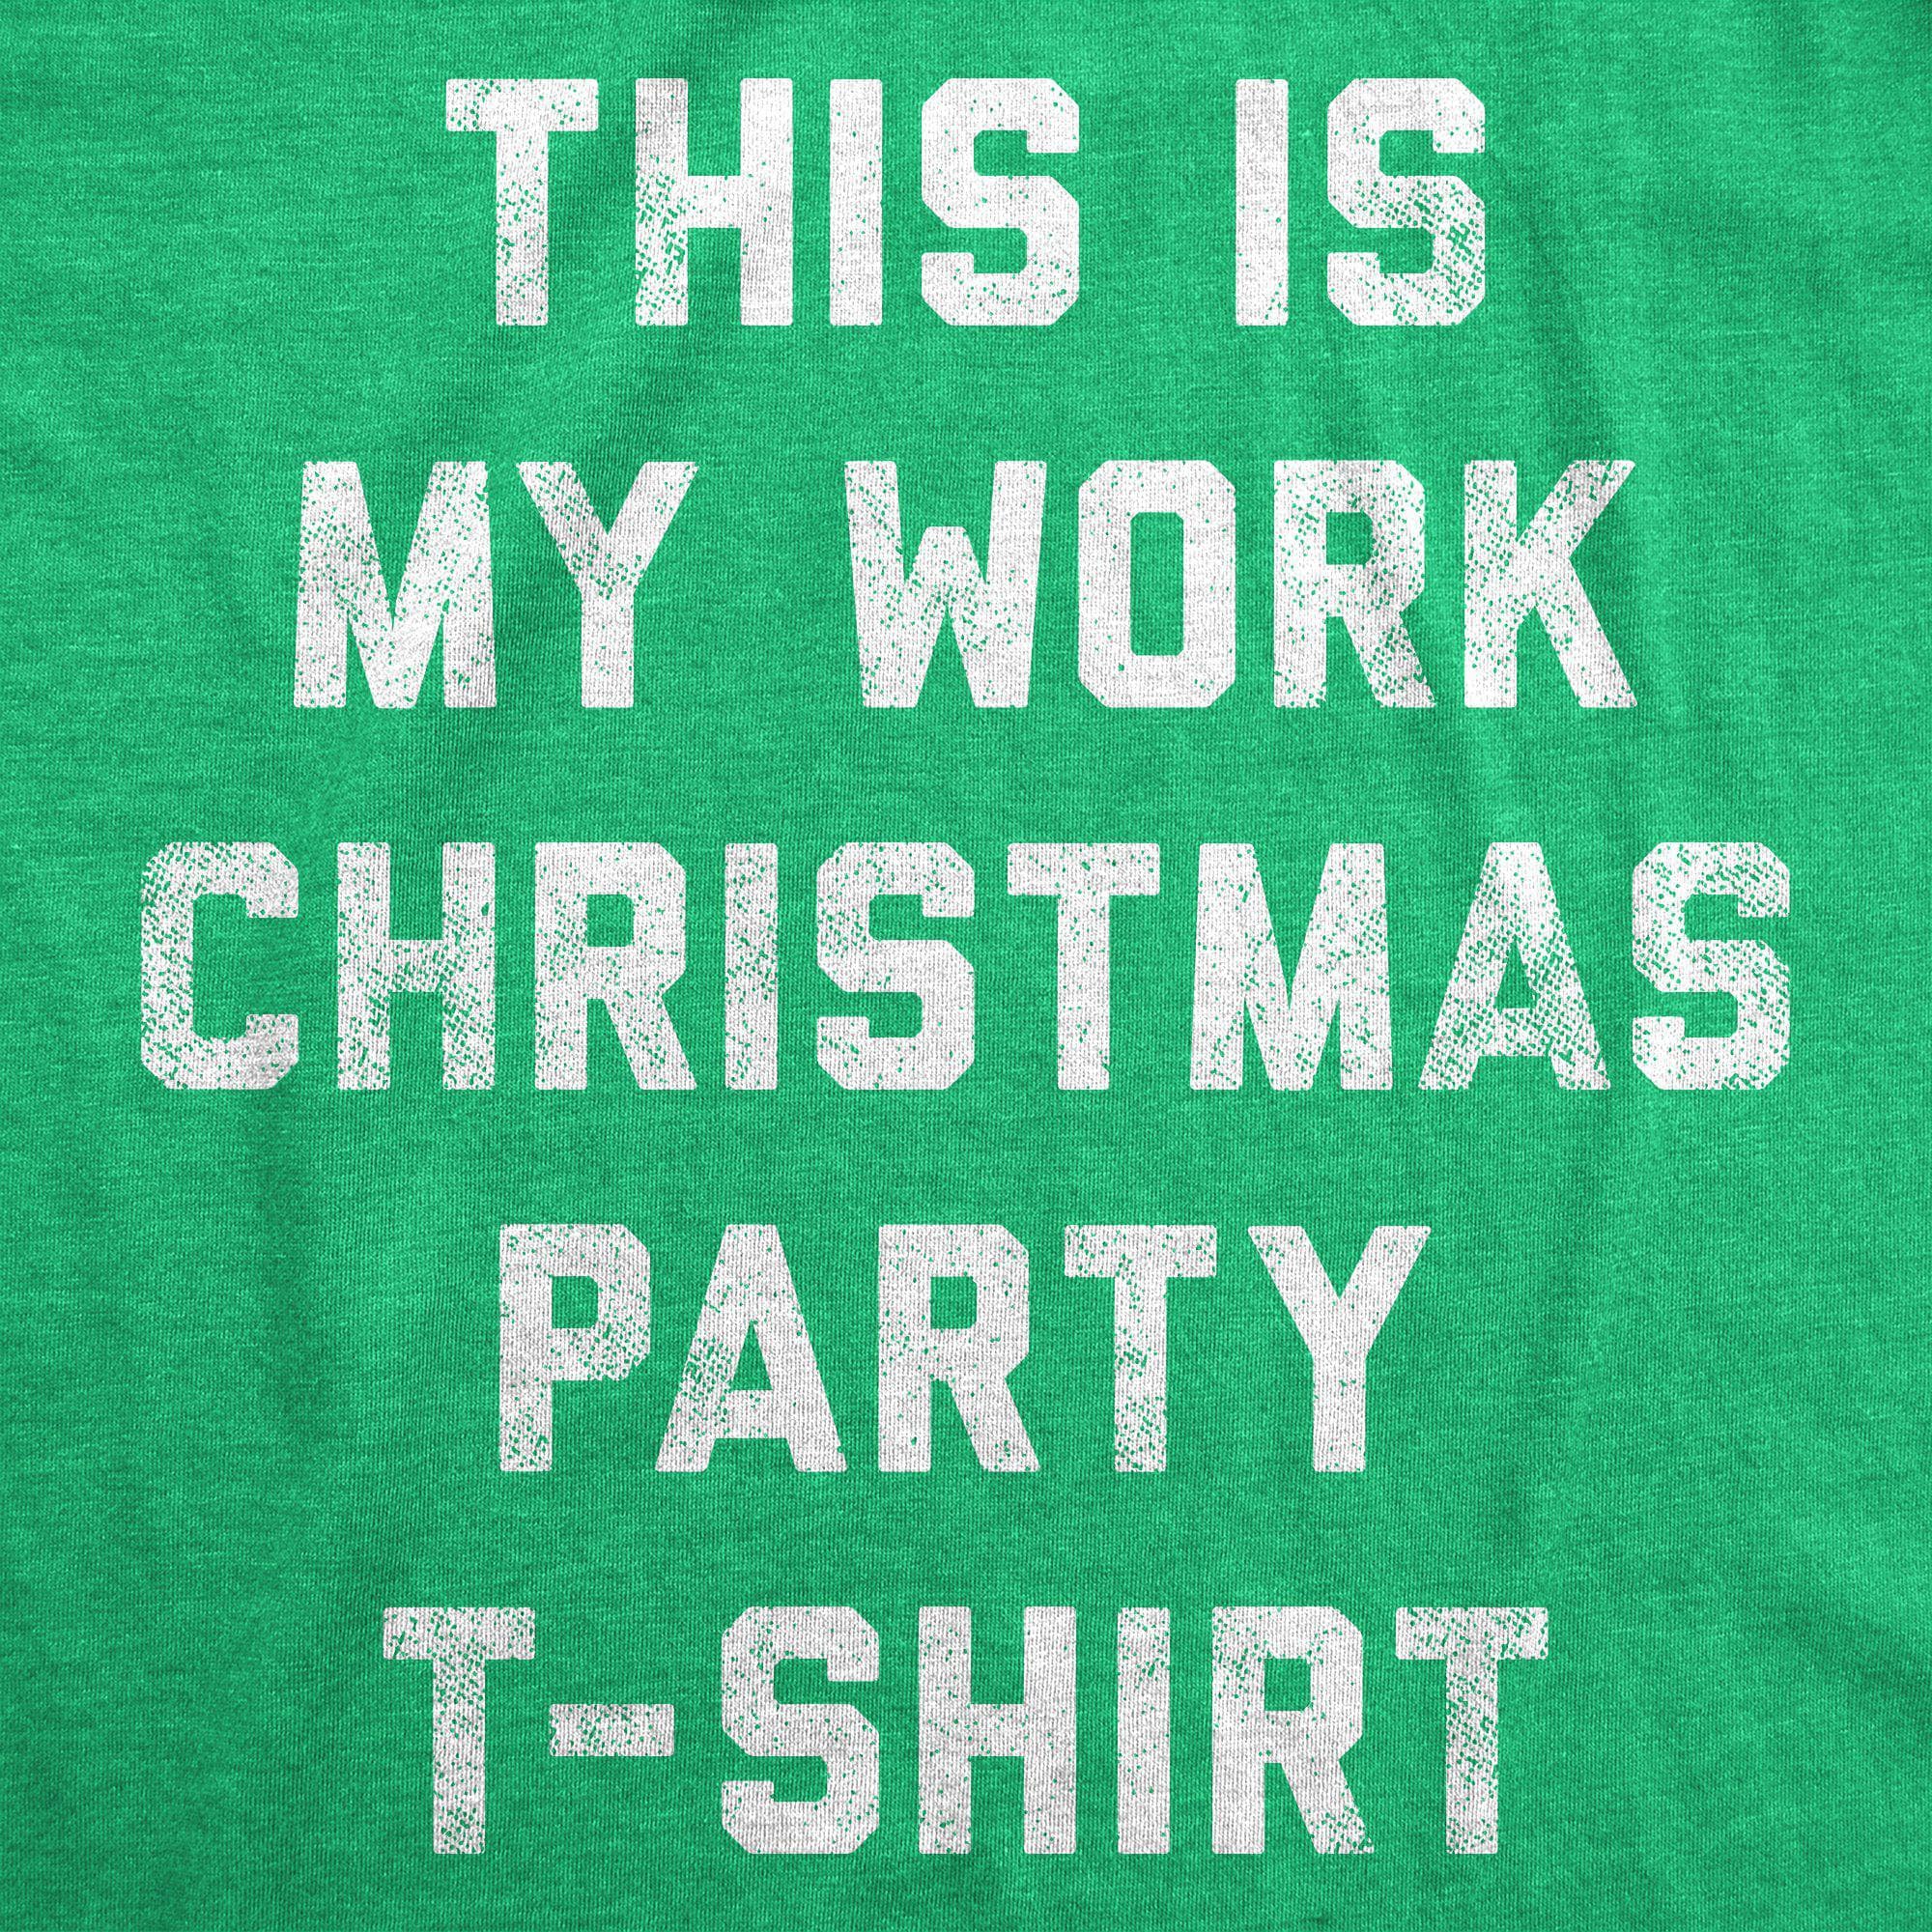 This Is My Work Christmas Party T-Shirt Women's Tshirt - Crazy Dog T-Shirts